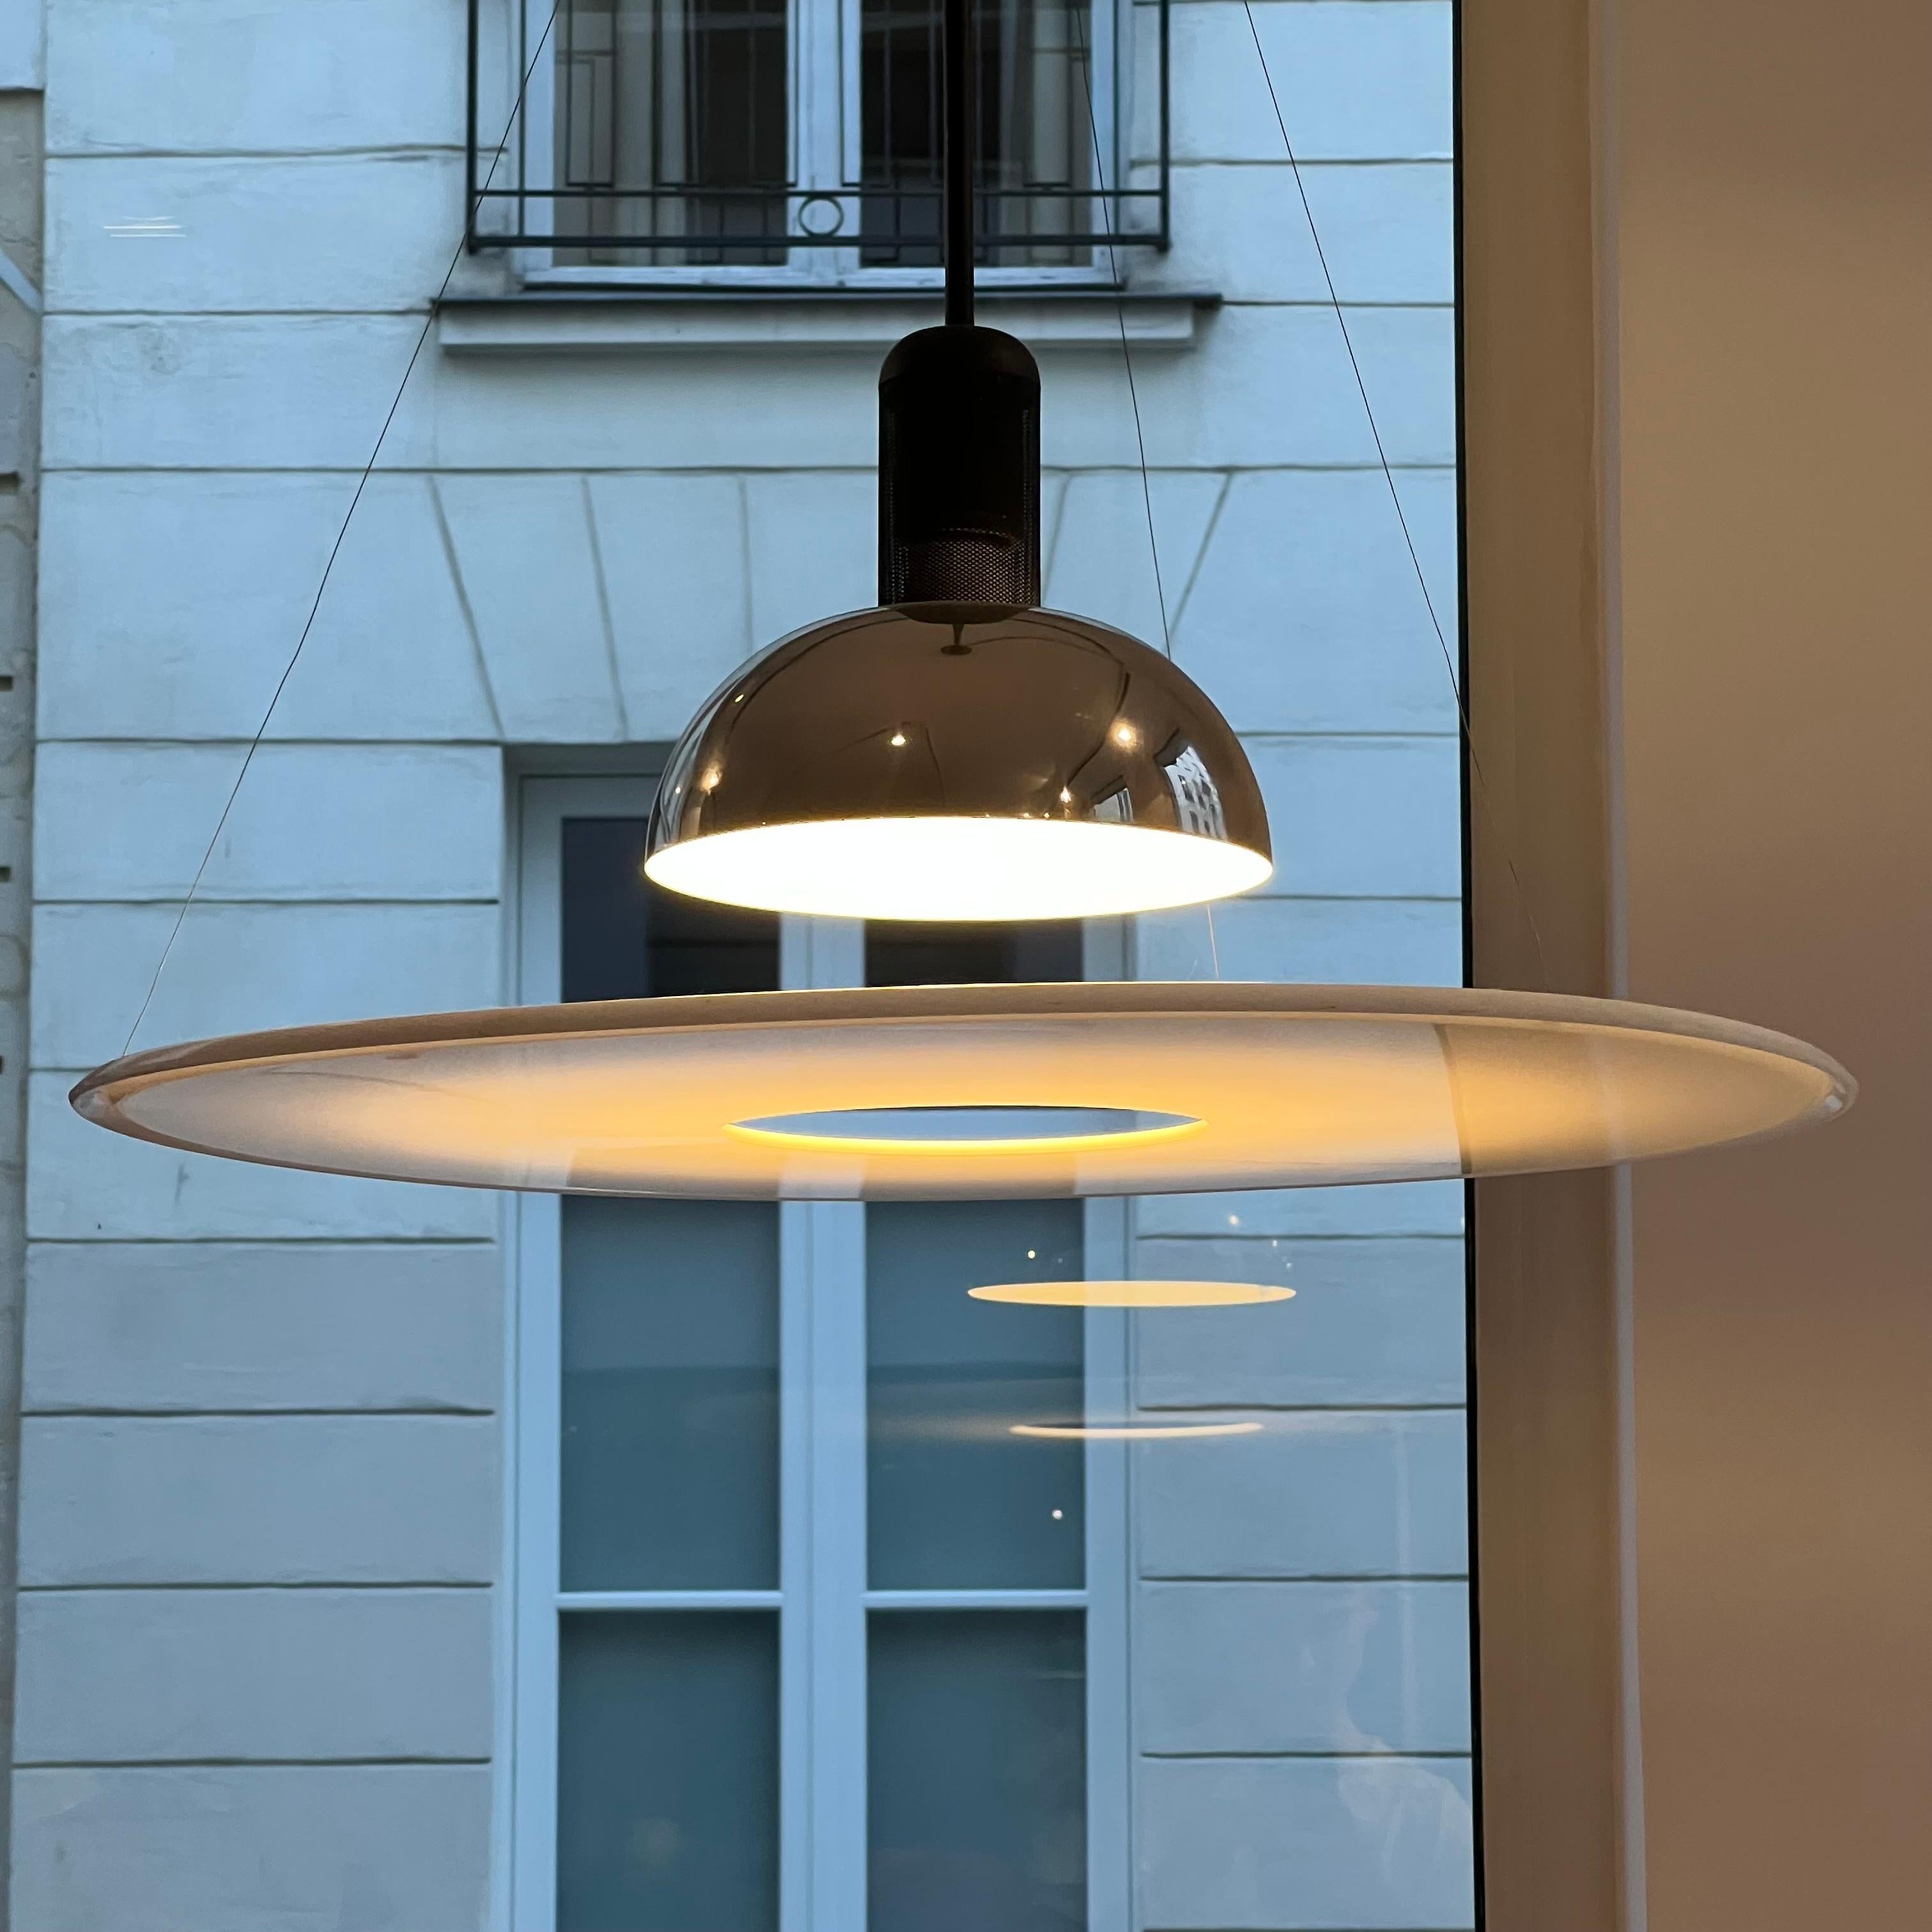 Late 20th Century Frisbi Lamp by Achille Castiglioni for Flos, 1973